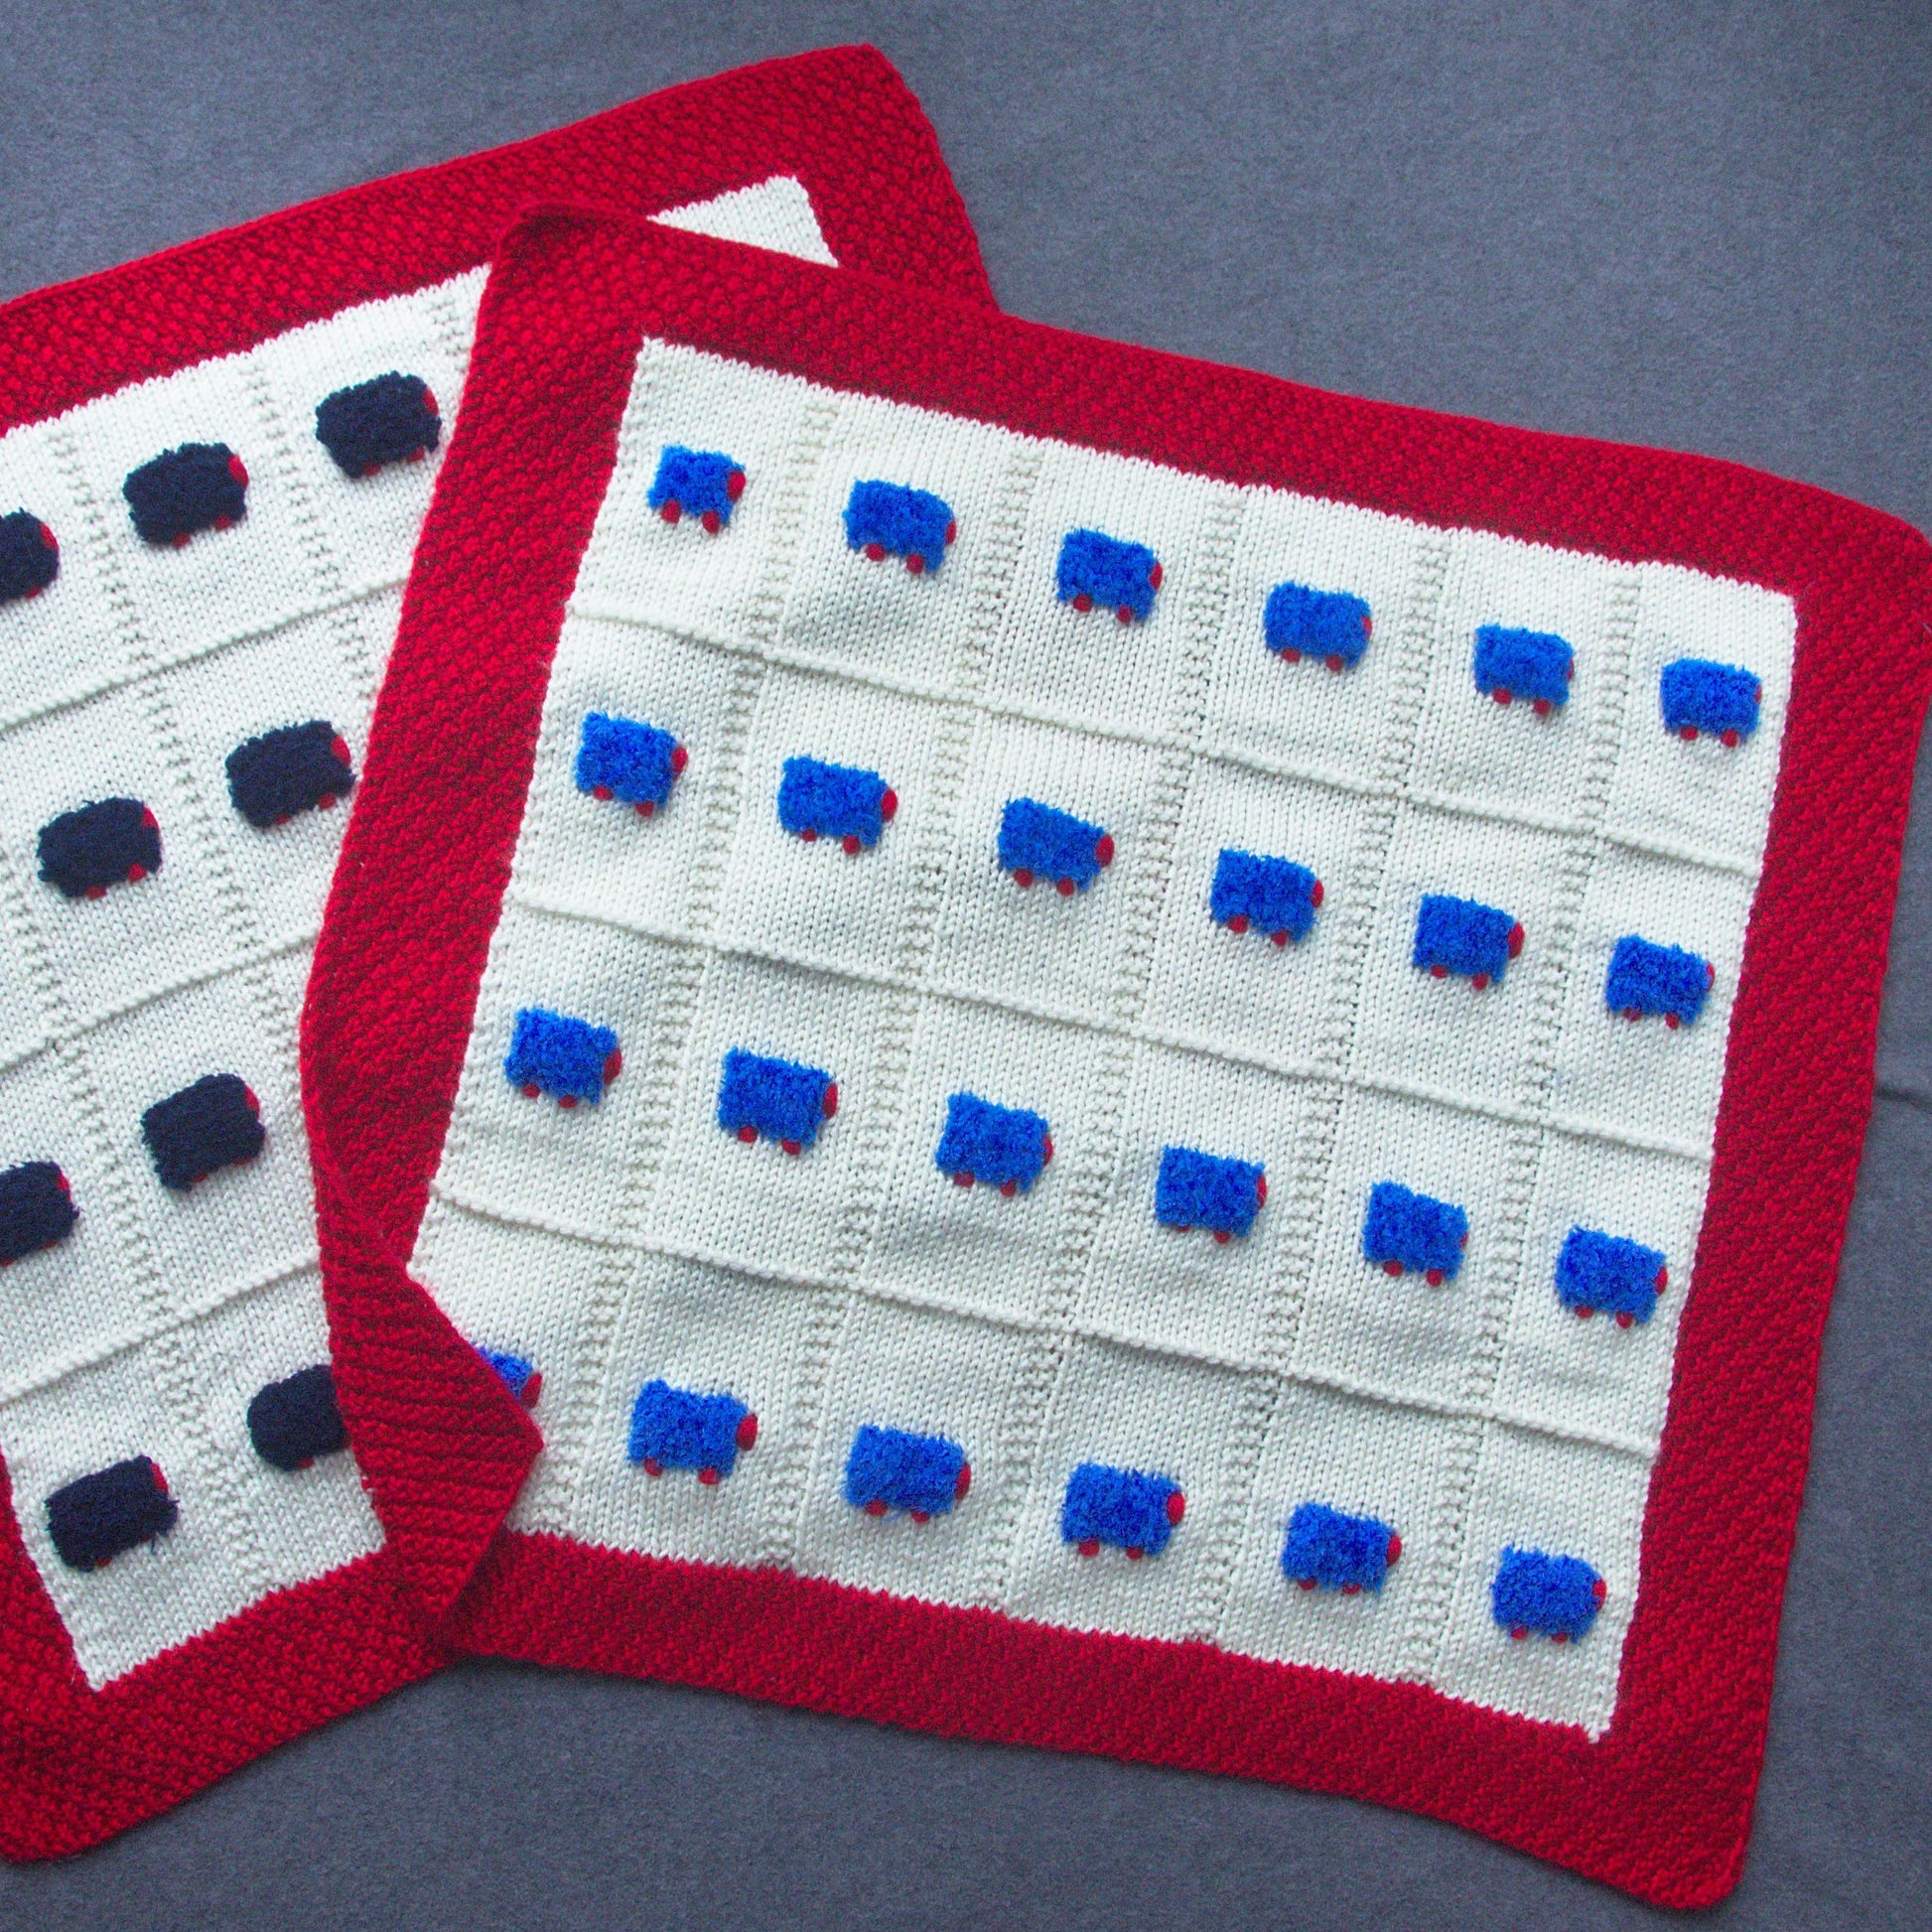 The request here was for some blankets in patriotic colors. One of our first custom orders.